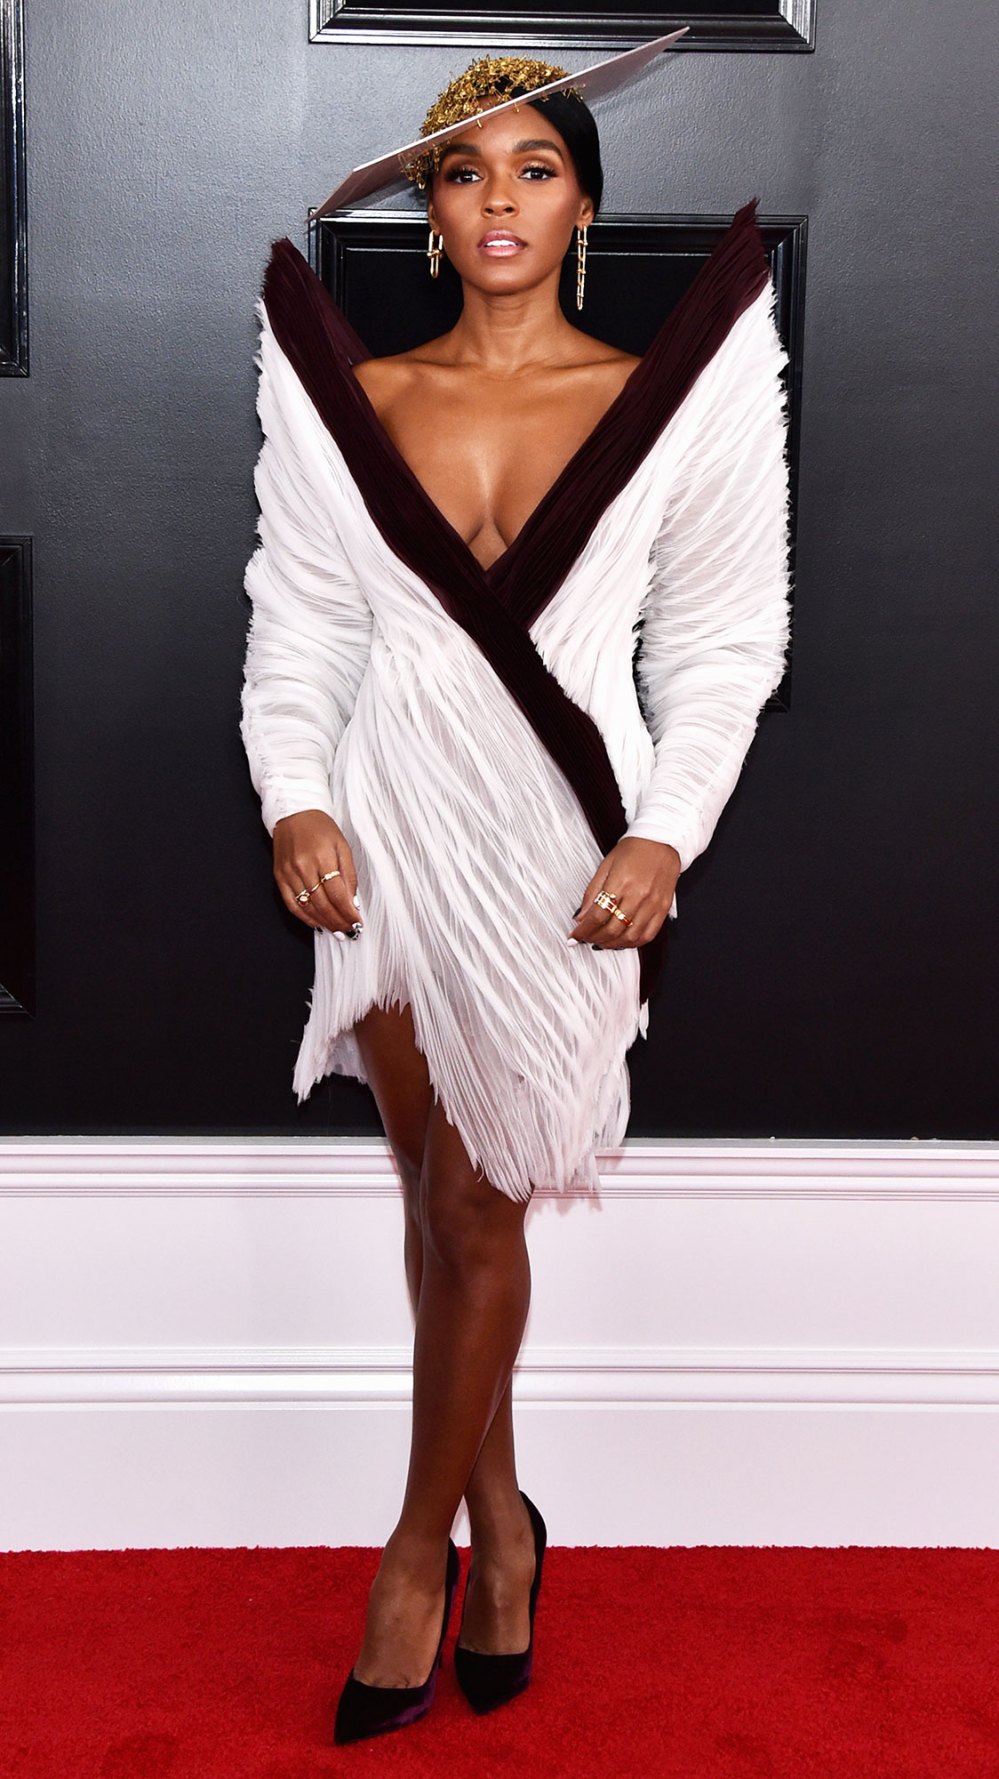 https://www.usmagazine.com/stylish/pictures/grammys-2019-red-carpet-see-celeb-dresses-gowns/hennessy-carolina-4/